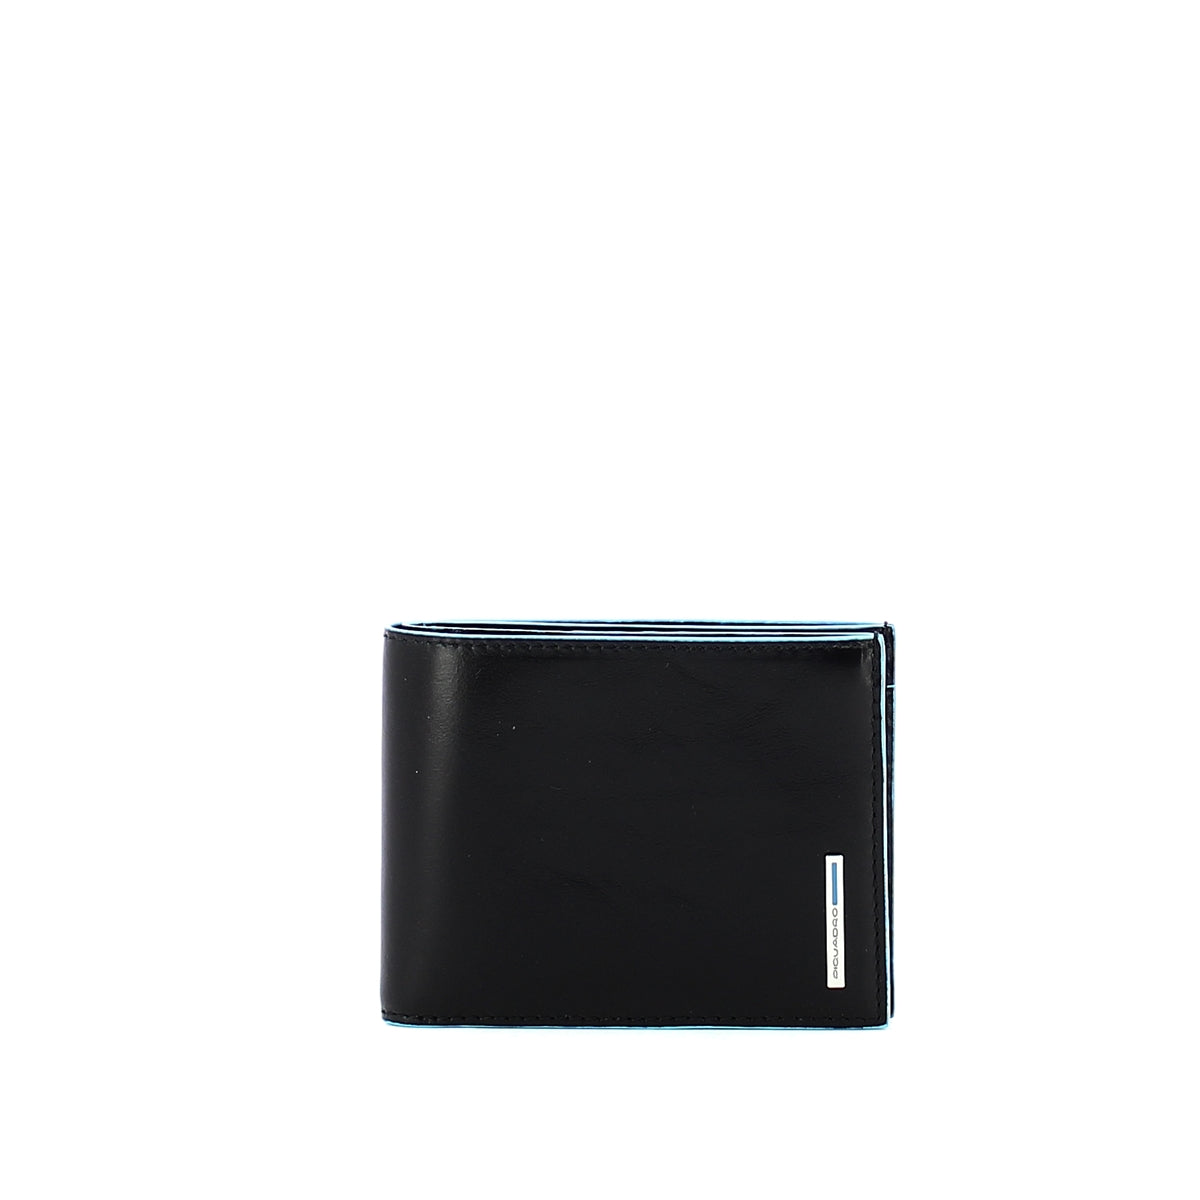 Piquadro - Men wallet with coin pouch Blue Square - PU1239B2R - NERO